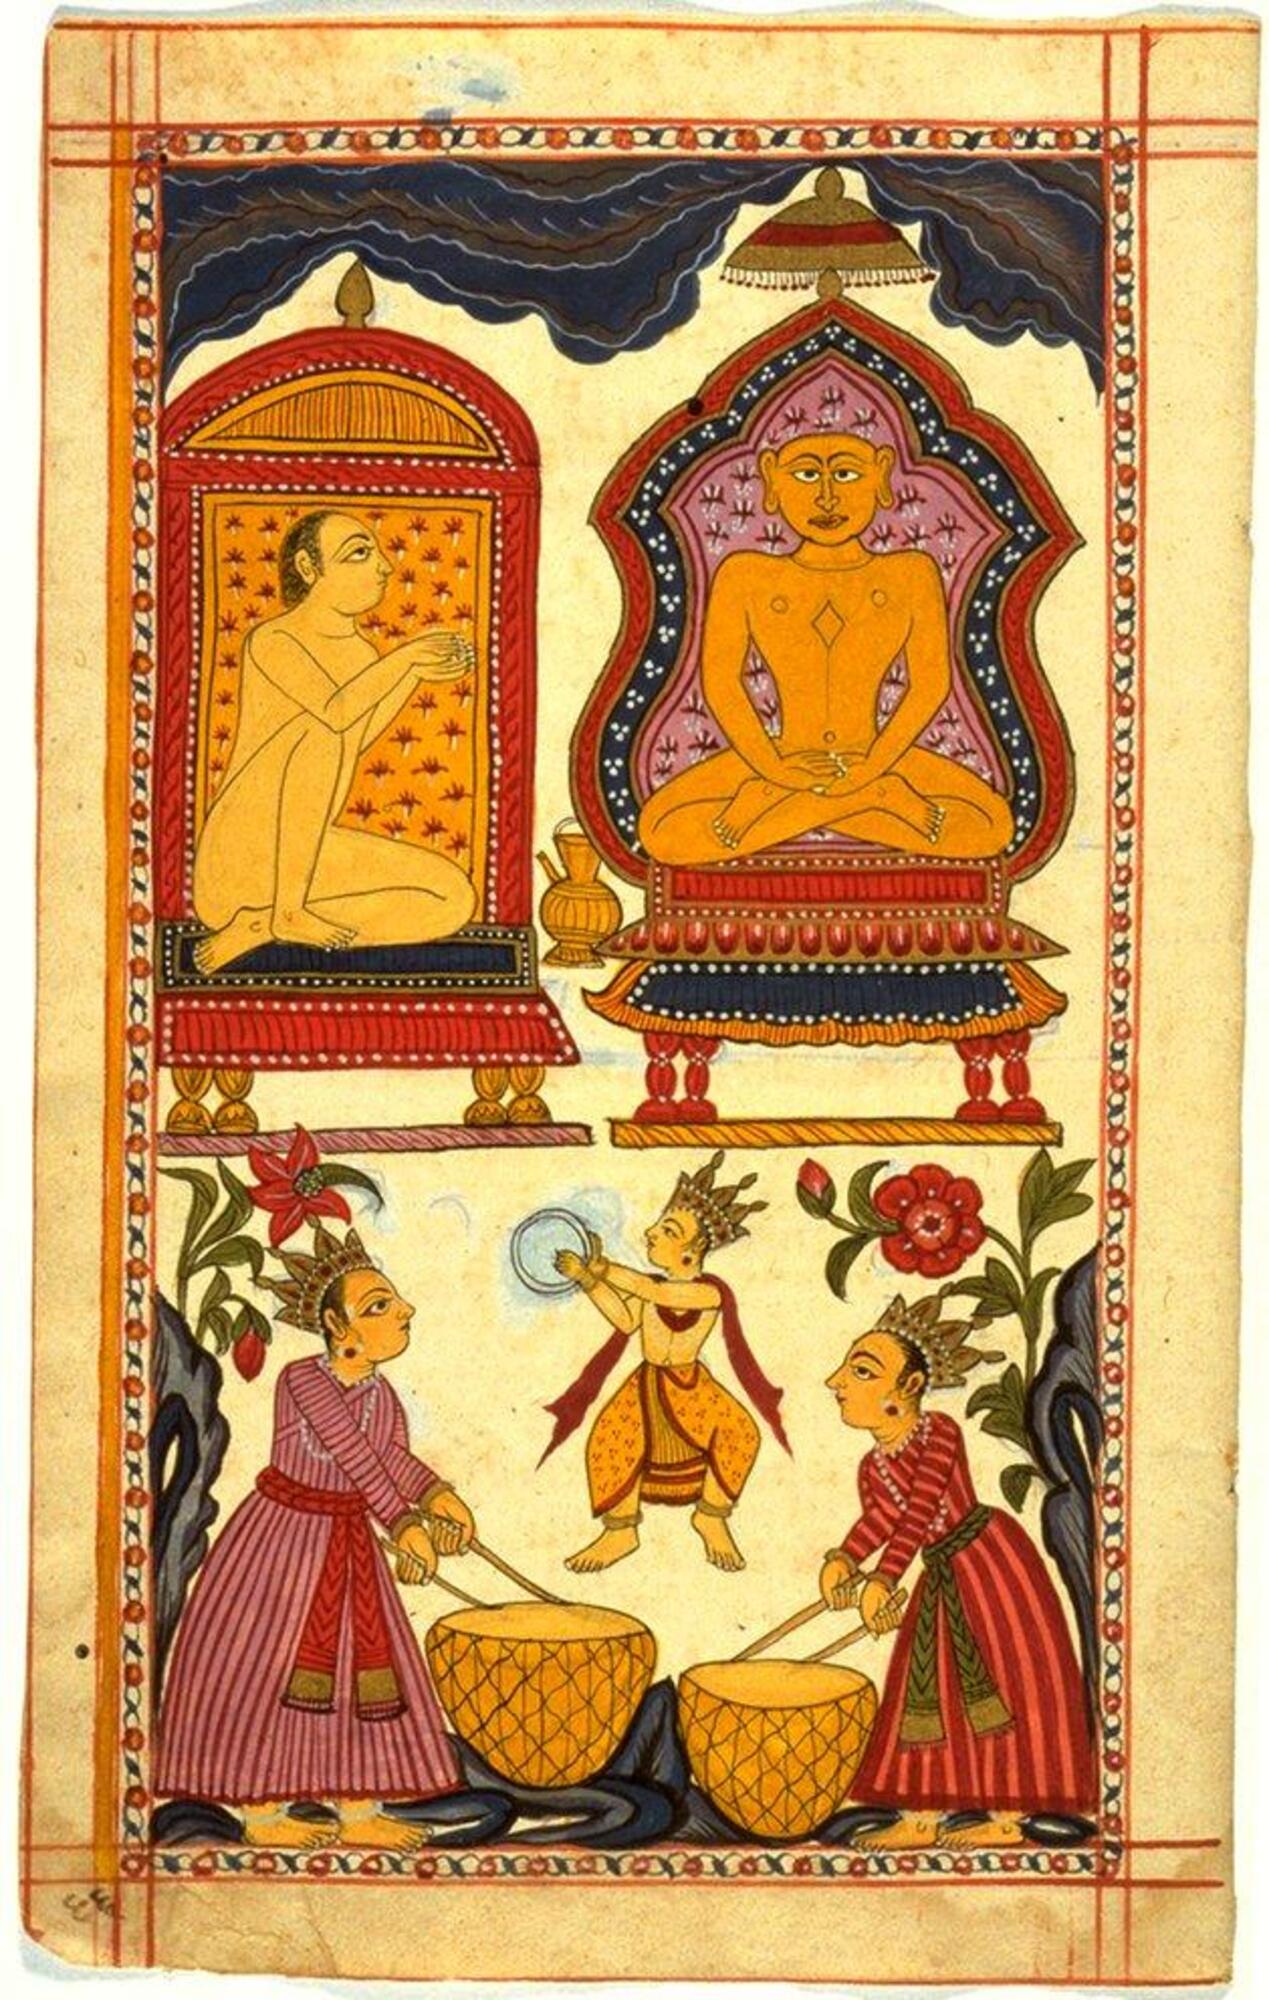 Multi-colored ink on paper. Reds and golds make up the primary focus colors and are accented by dark blues. Features five figures, two larger figures on the top half of the page and three smaller figures on the bottom. Scene of worship.